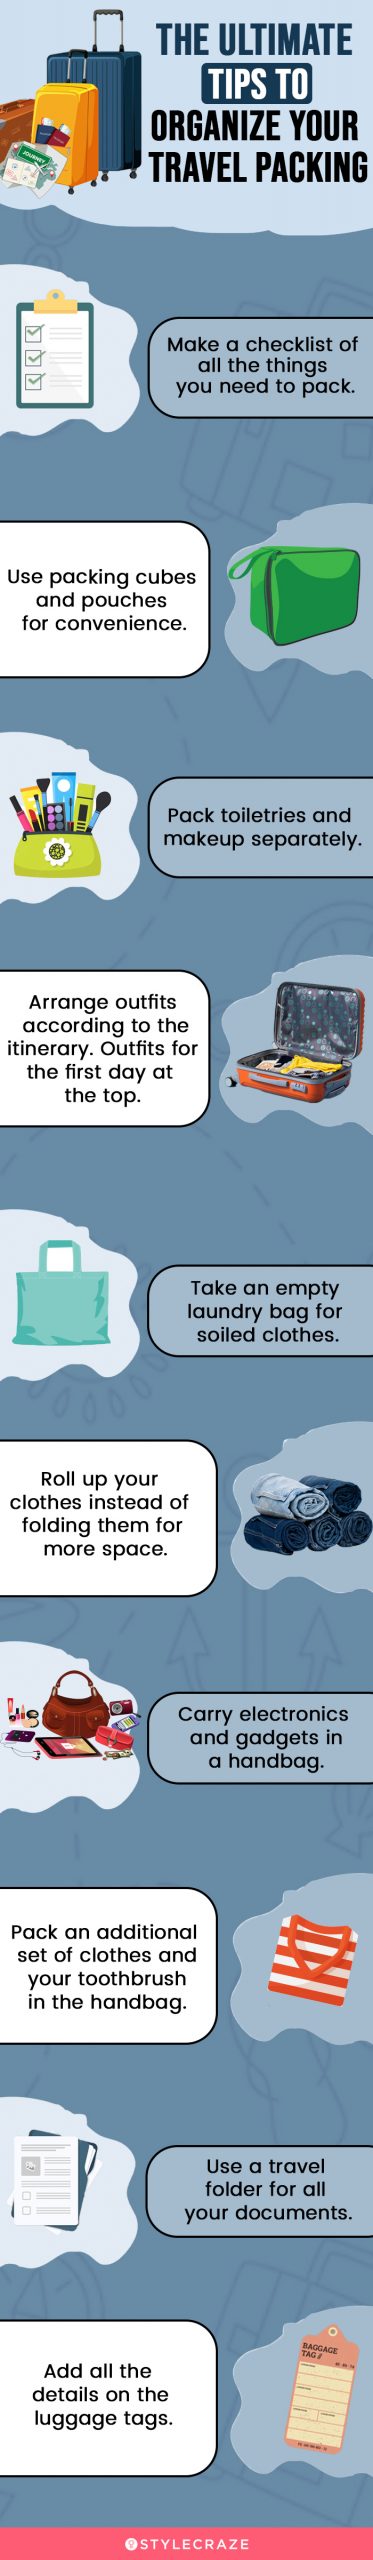 the ultimate tips to organize your travel packing (infographic)